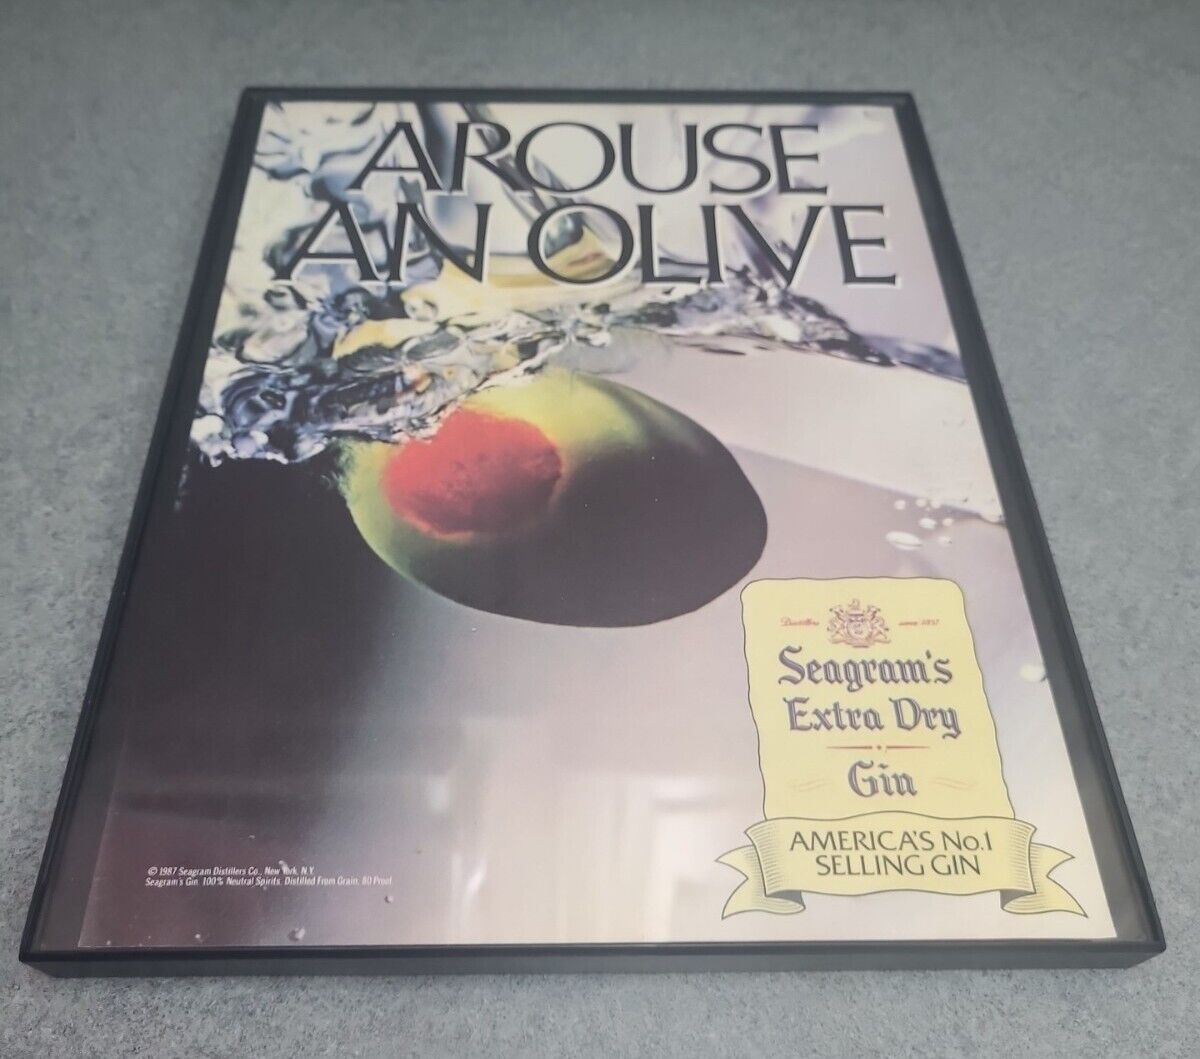 1987 Seagram\'s Extra Dry Gin Arouse An Olive Print Ad Man Cave Framed 8.5x11 